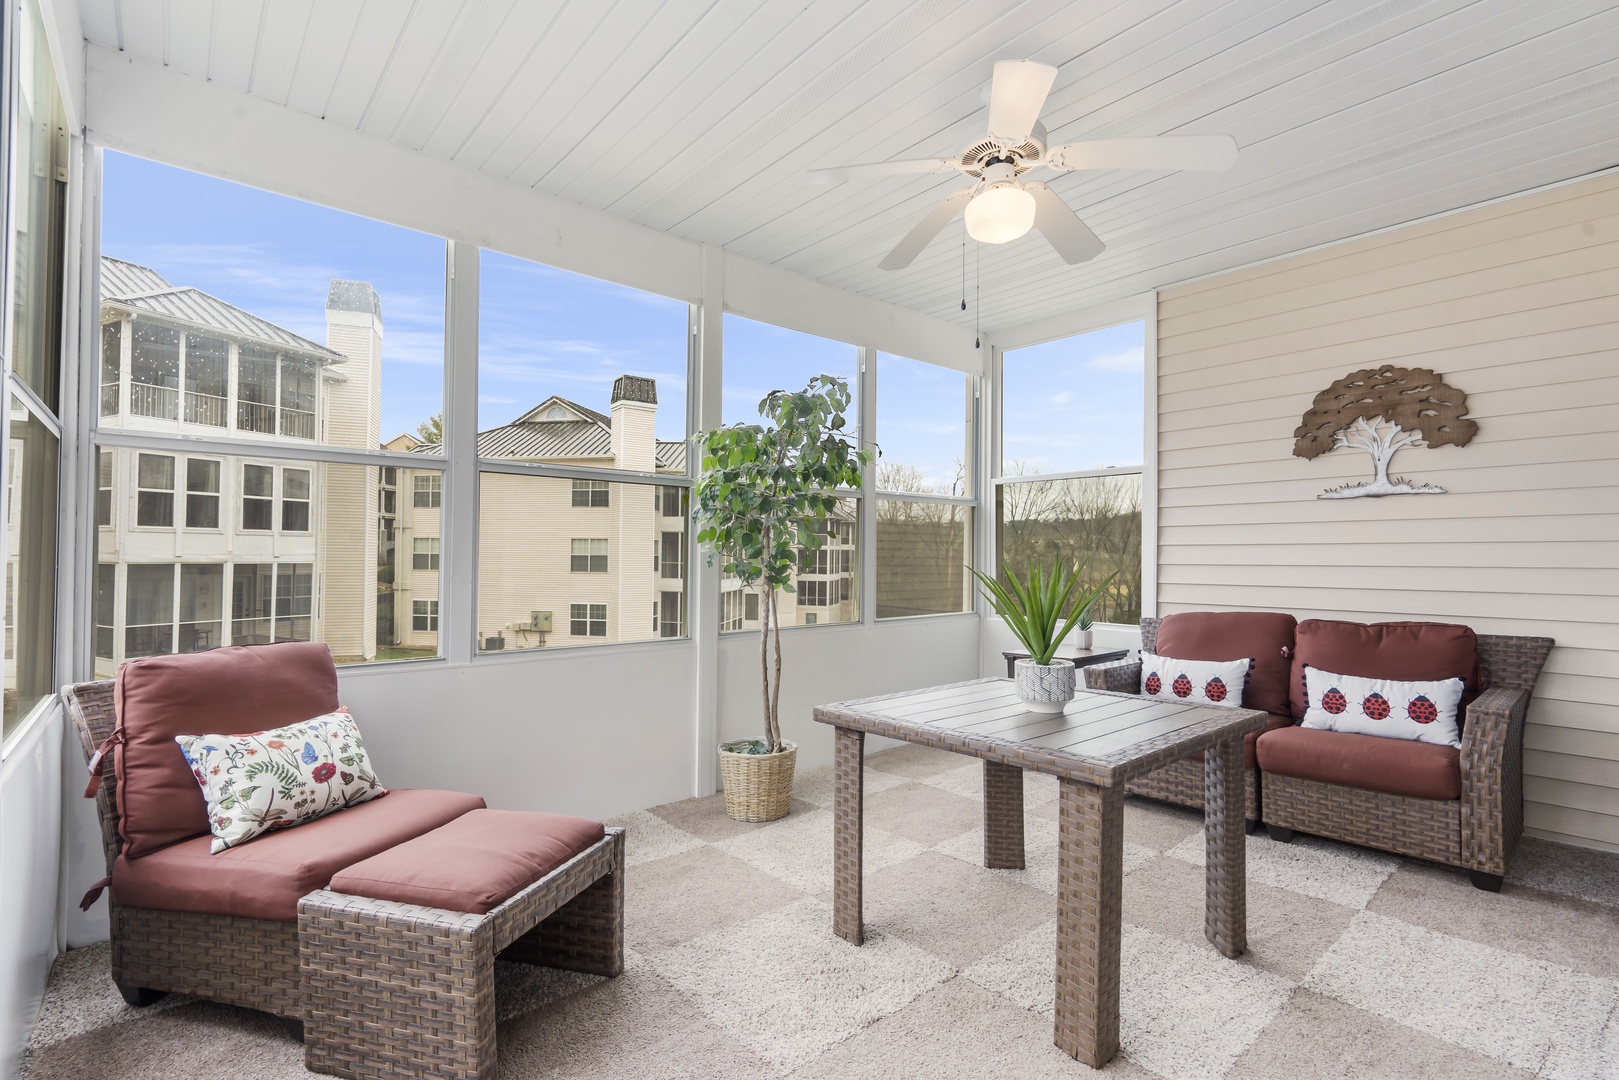 Lounge the day away with tranquil nature views in the cheerful sunroom